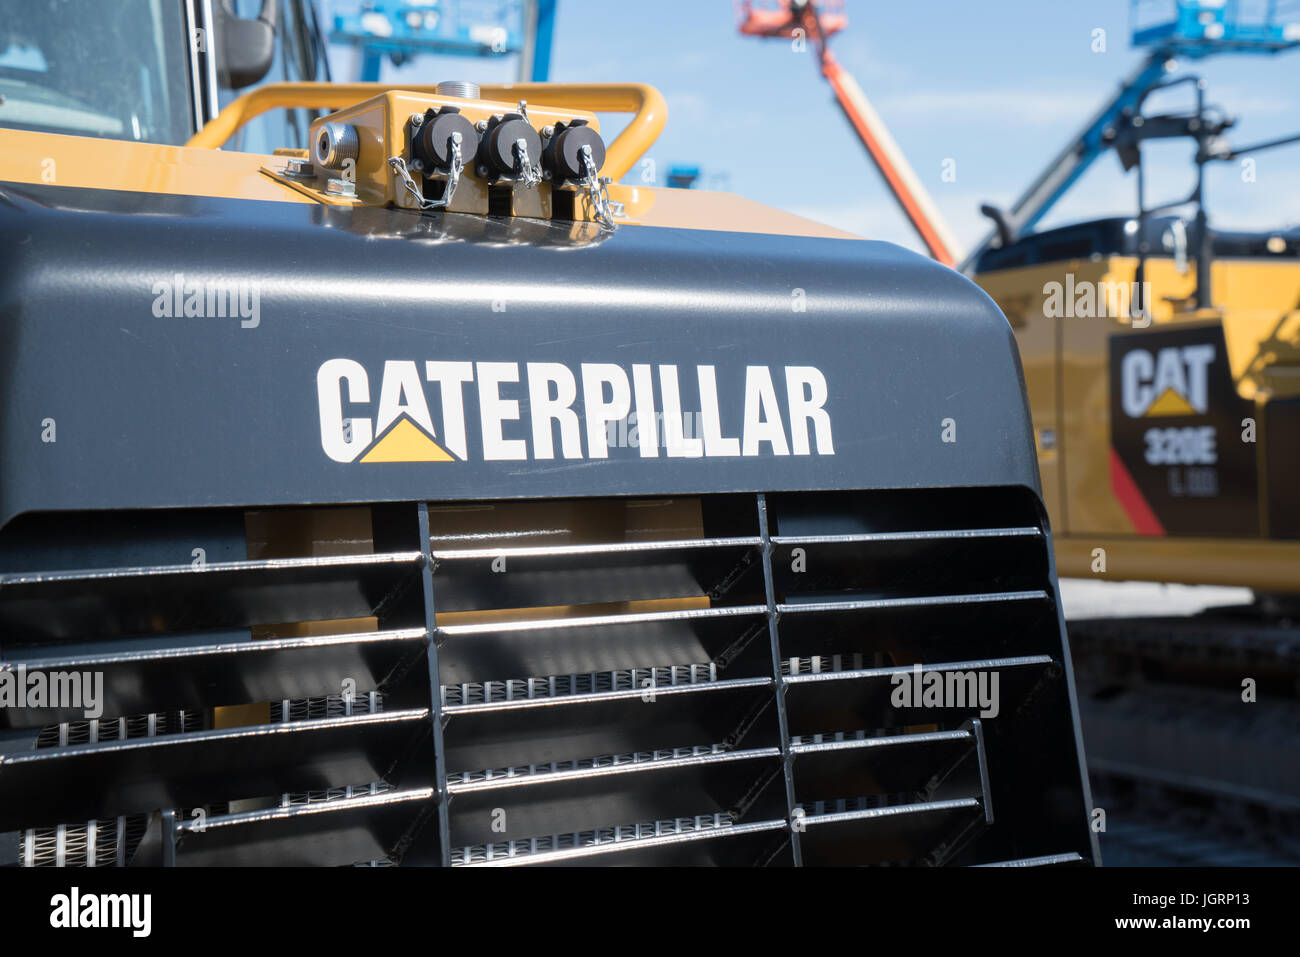 Litiz, PA, USA - April 23, 2016: Caterpillar heavy equipment lined up at Caterpillar dealer. Caterpillar is one of the largest manufacturers of heavy  Stock Photo